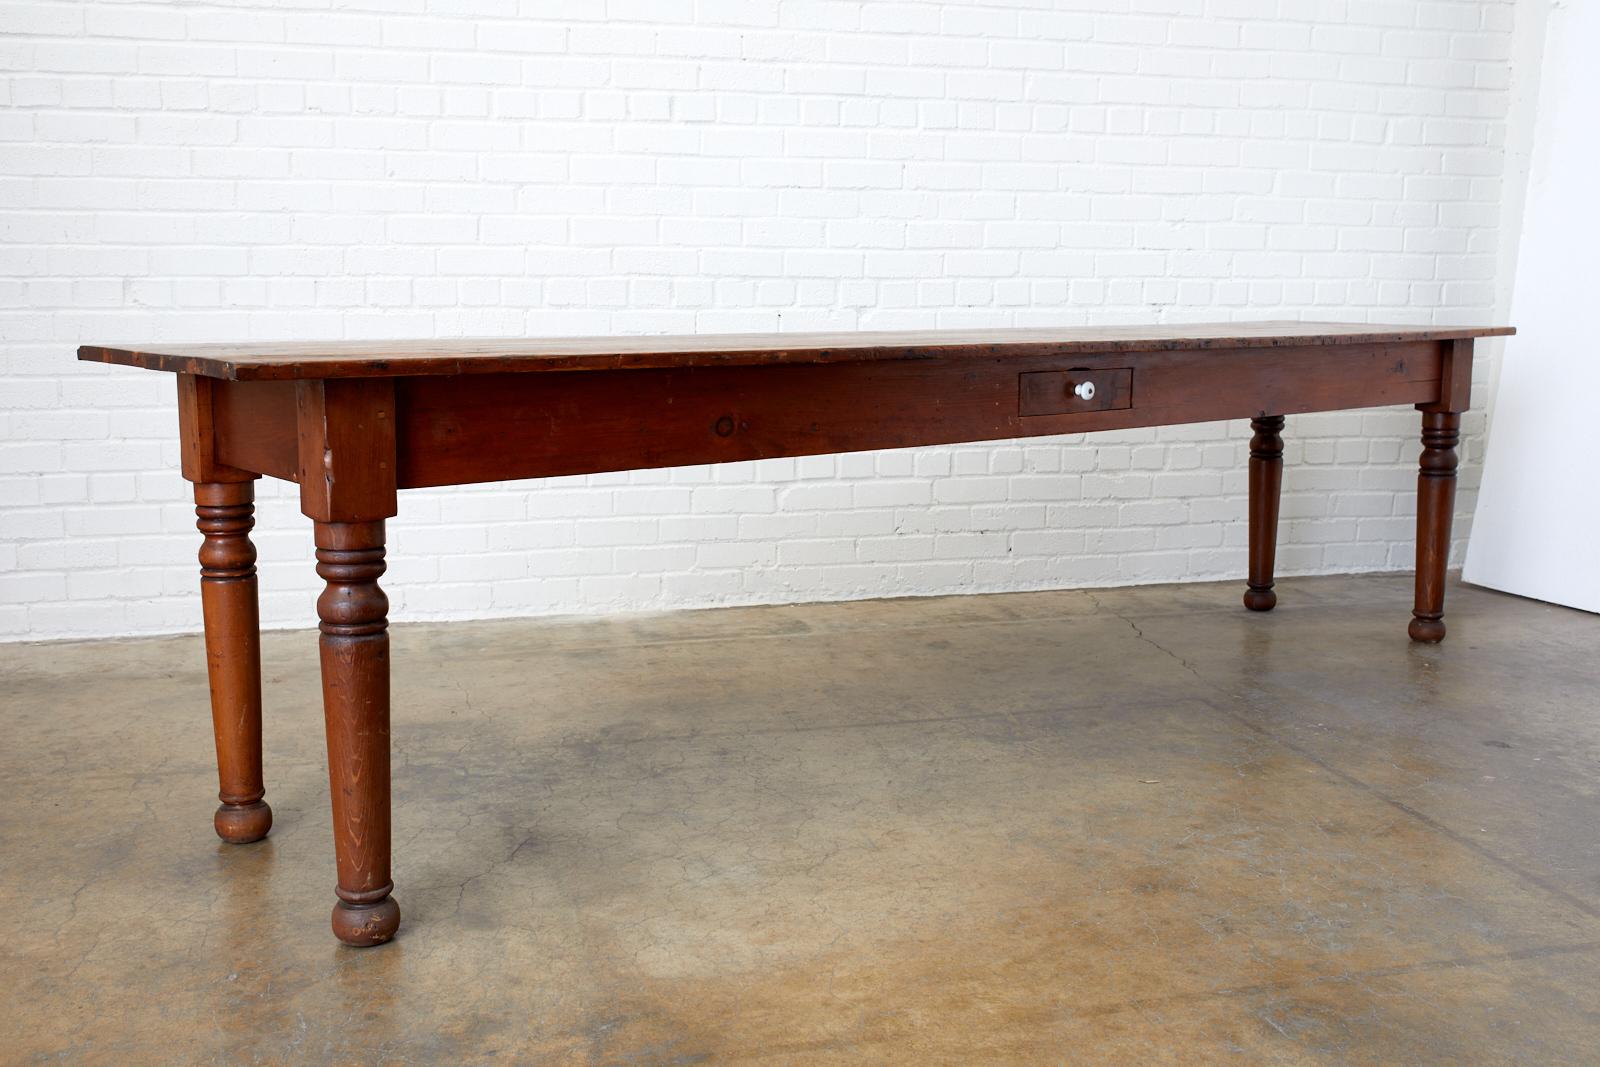 Large, rustic 19th century Pennsylvania Dutch American farmhouse table, harvest table, or work table. Features a nearly 10 foot long plank top that appears to be pine supported by thick turned legs with ball feet. The tables has a storage drawer in